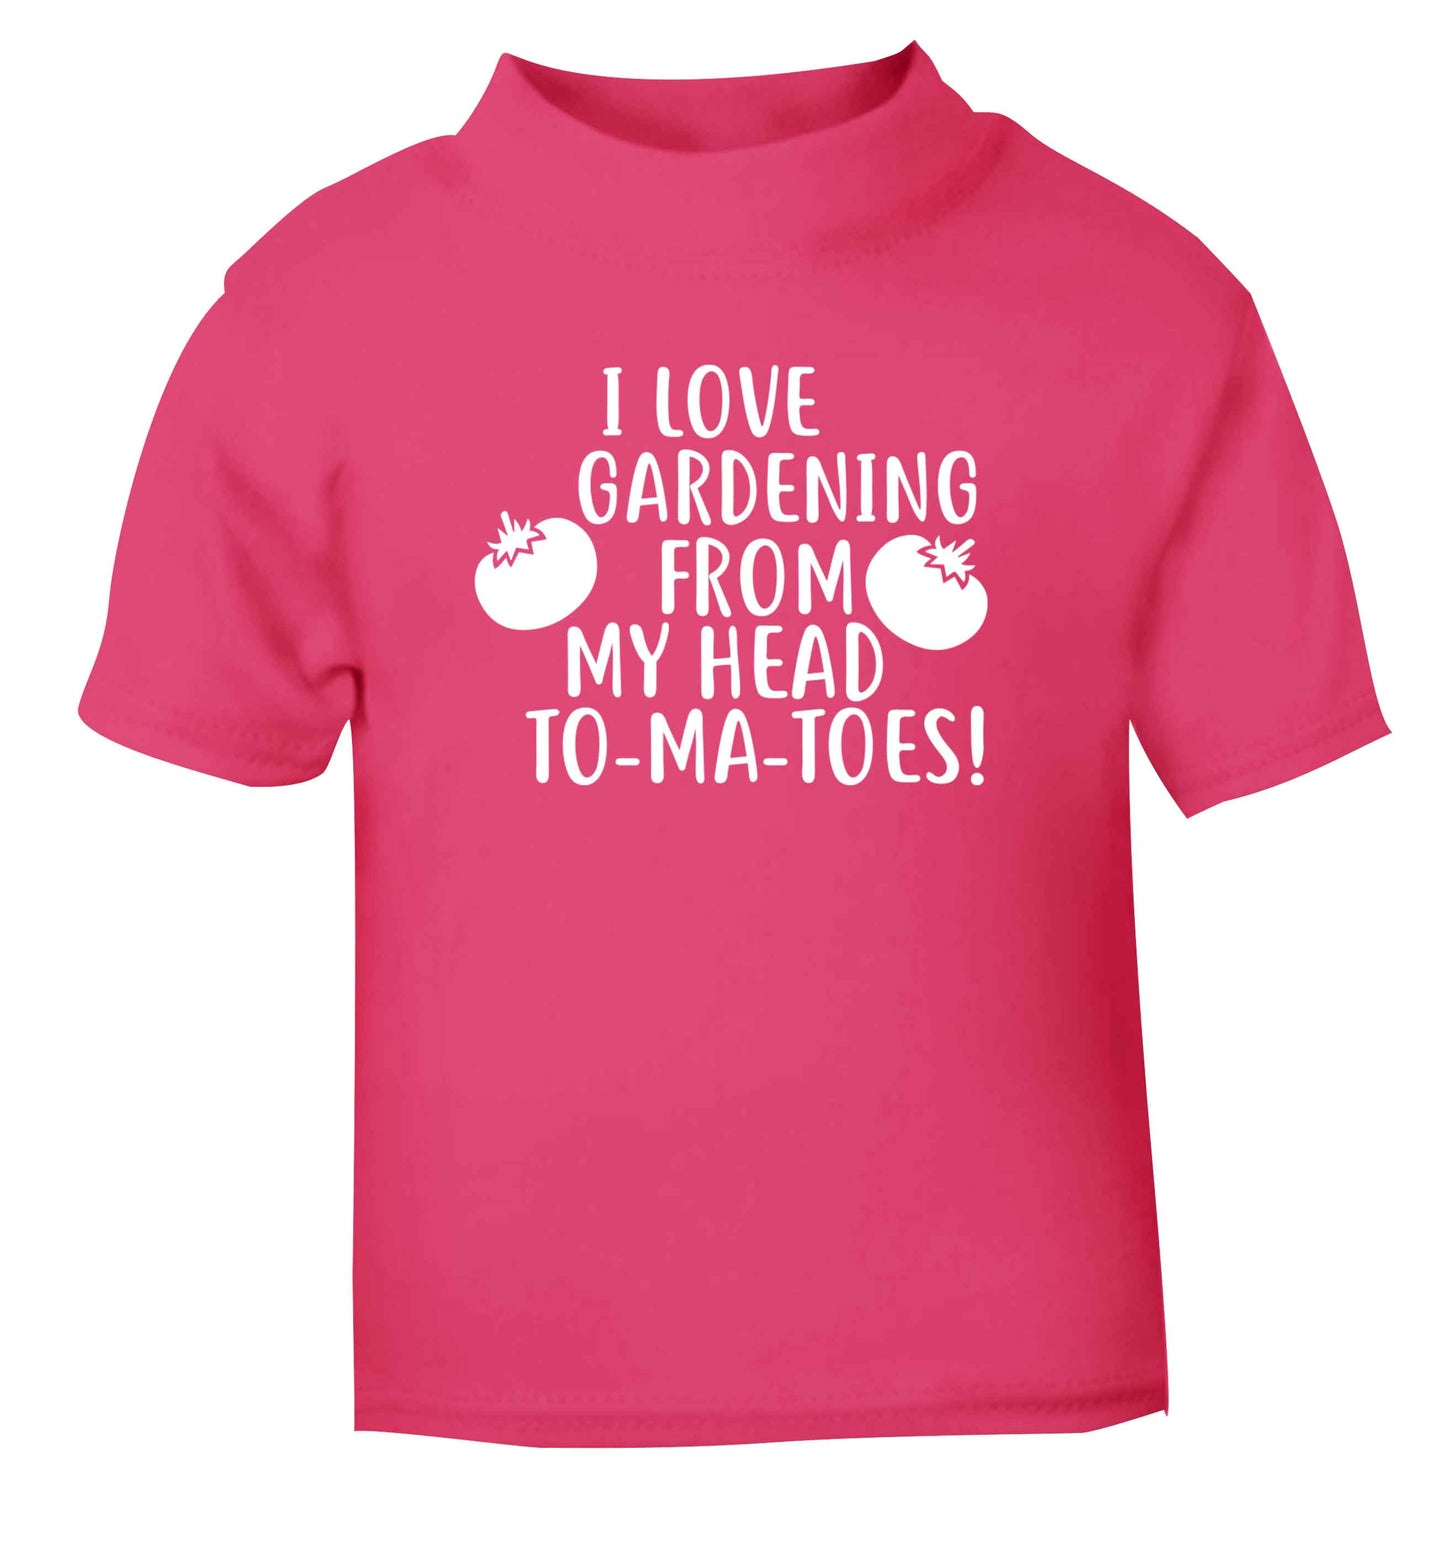 I love gardening from my head to-ma-toes pink Baby Toddler Tshirt 2 Years